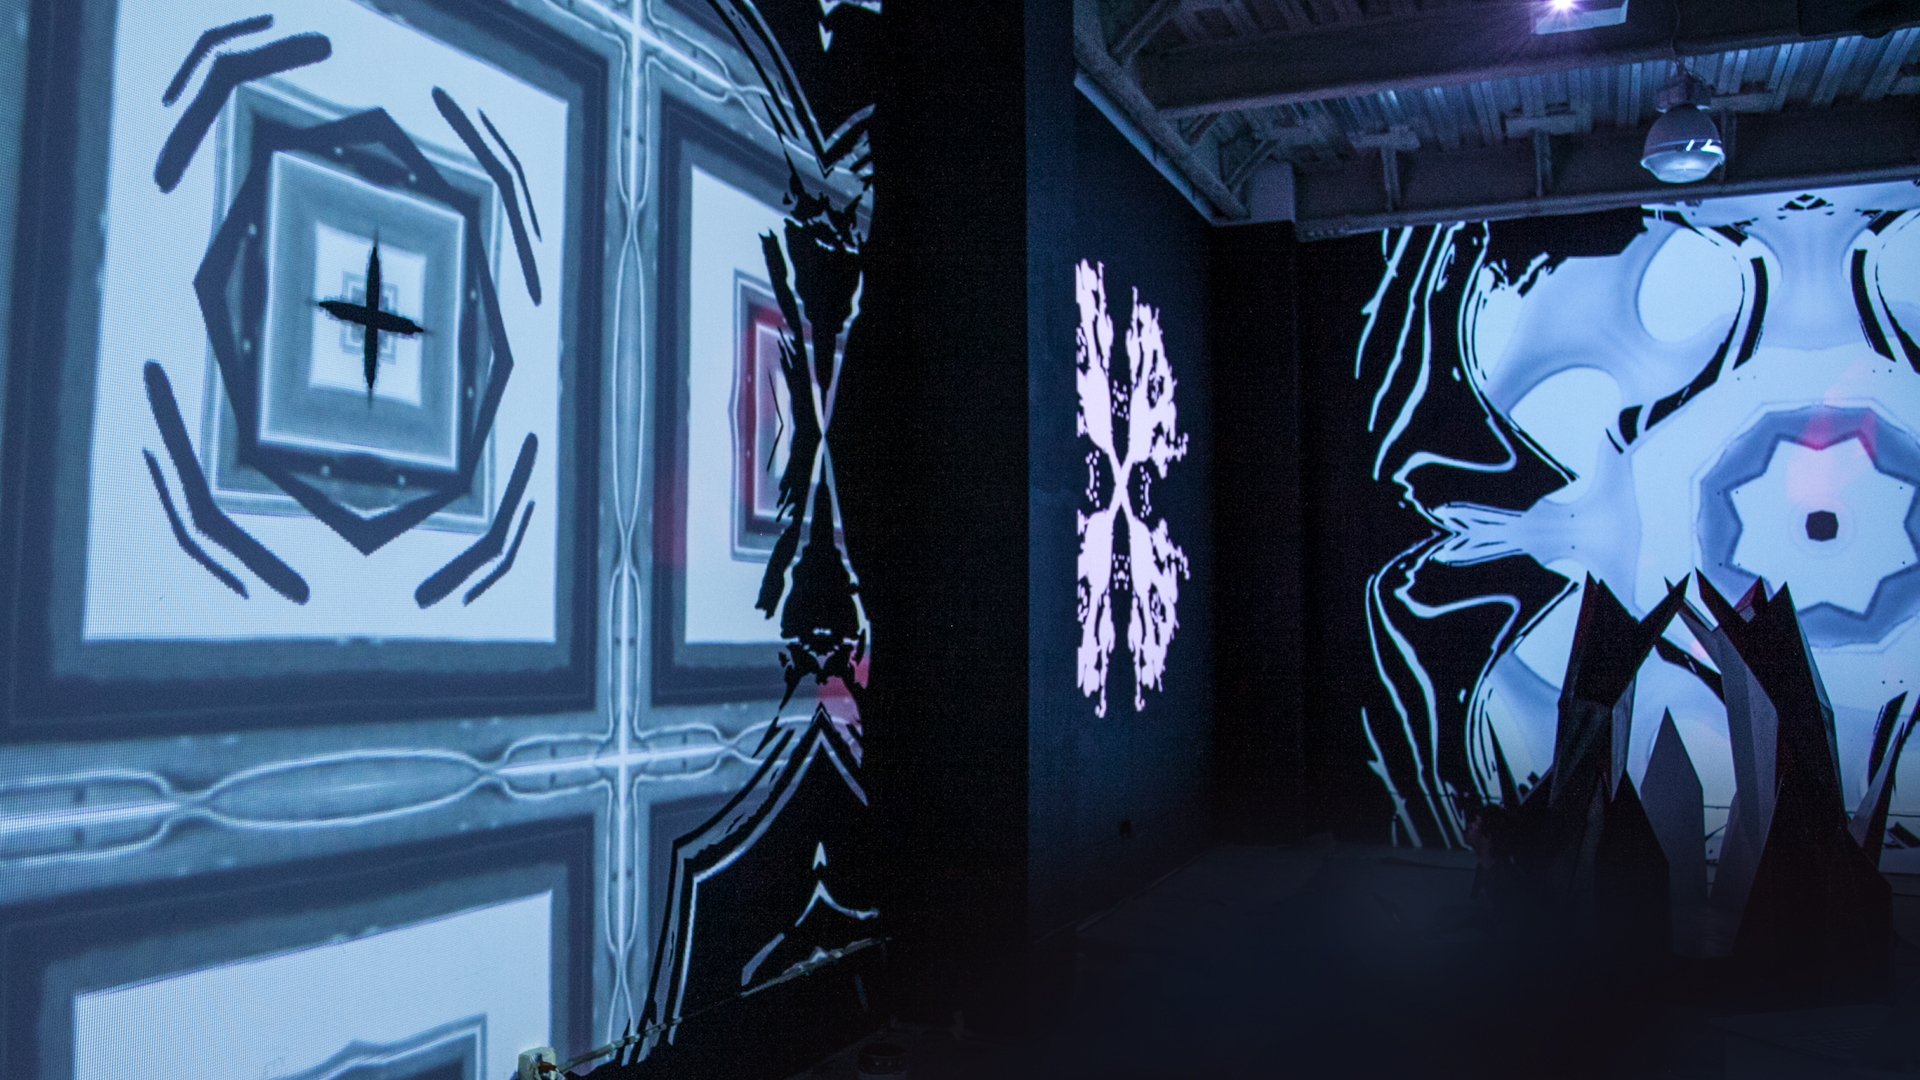 00 Project - hand painted murals with projection mapping